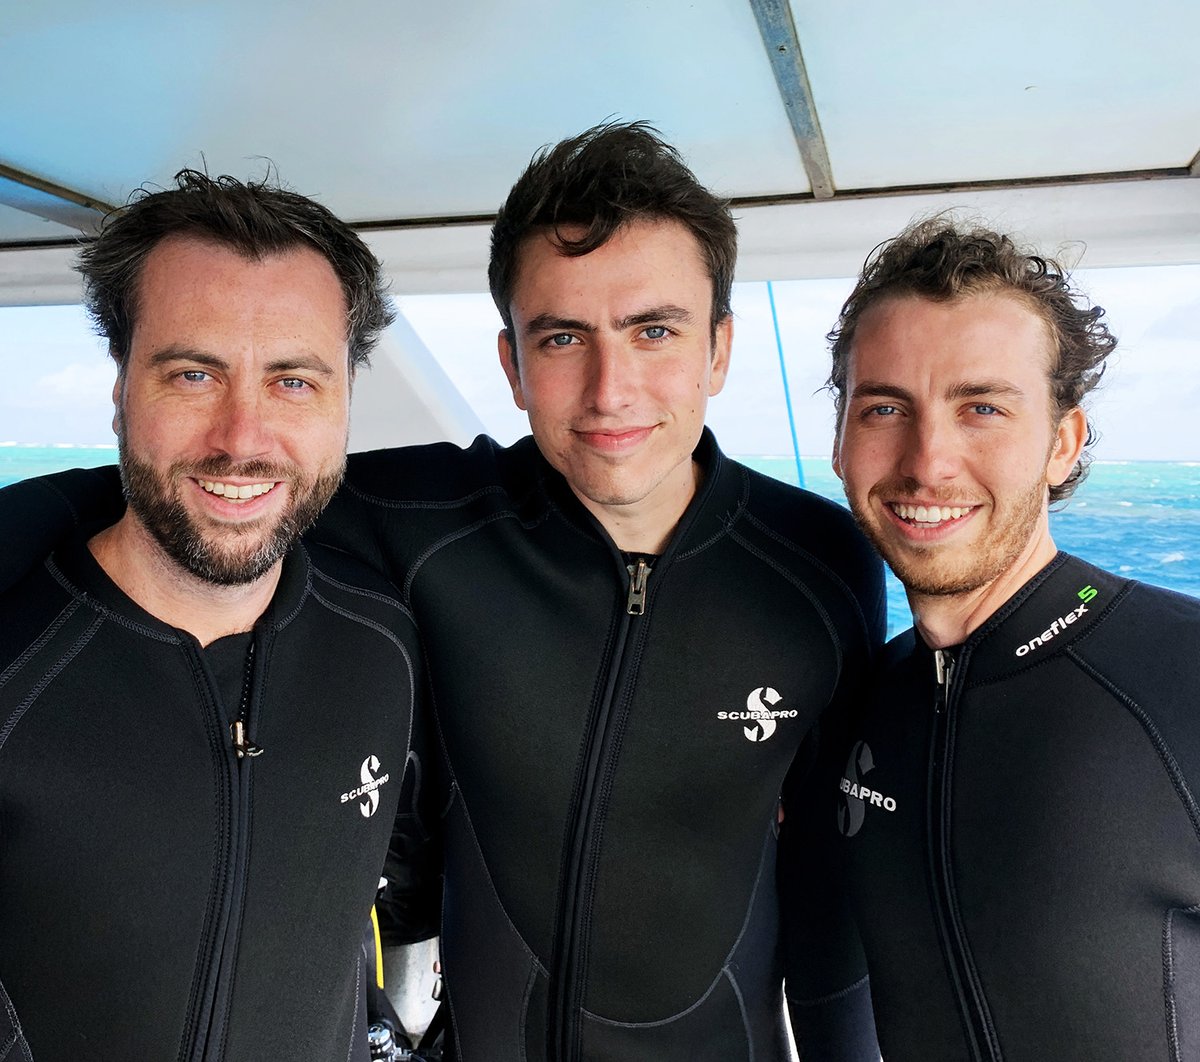 On this #FathersDay2023 couldn't be prouder of my three sons Byron (@ImprovAmbassadr), James, and @NickKennerly Made this in 2019 at the #GreatBarrierReef @MelHarris56 @CanonUSApro @jaketapper @JoeNBC @ccwhip @JReinerMD #Australia @mikebarnicle @mluckovichajc @PeteSouza